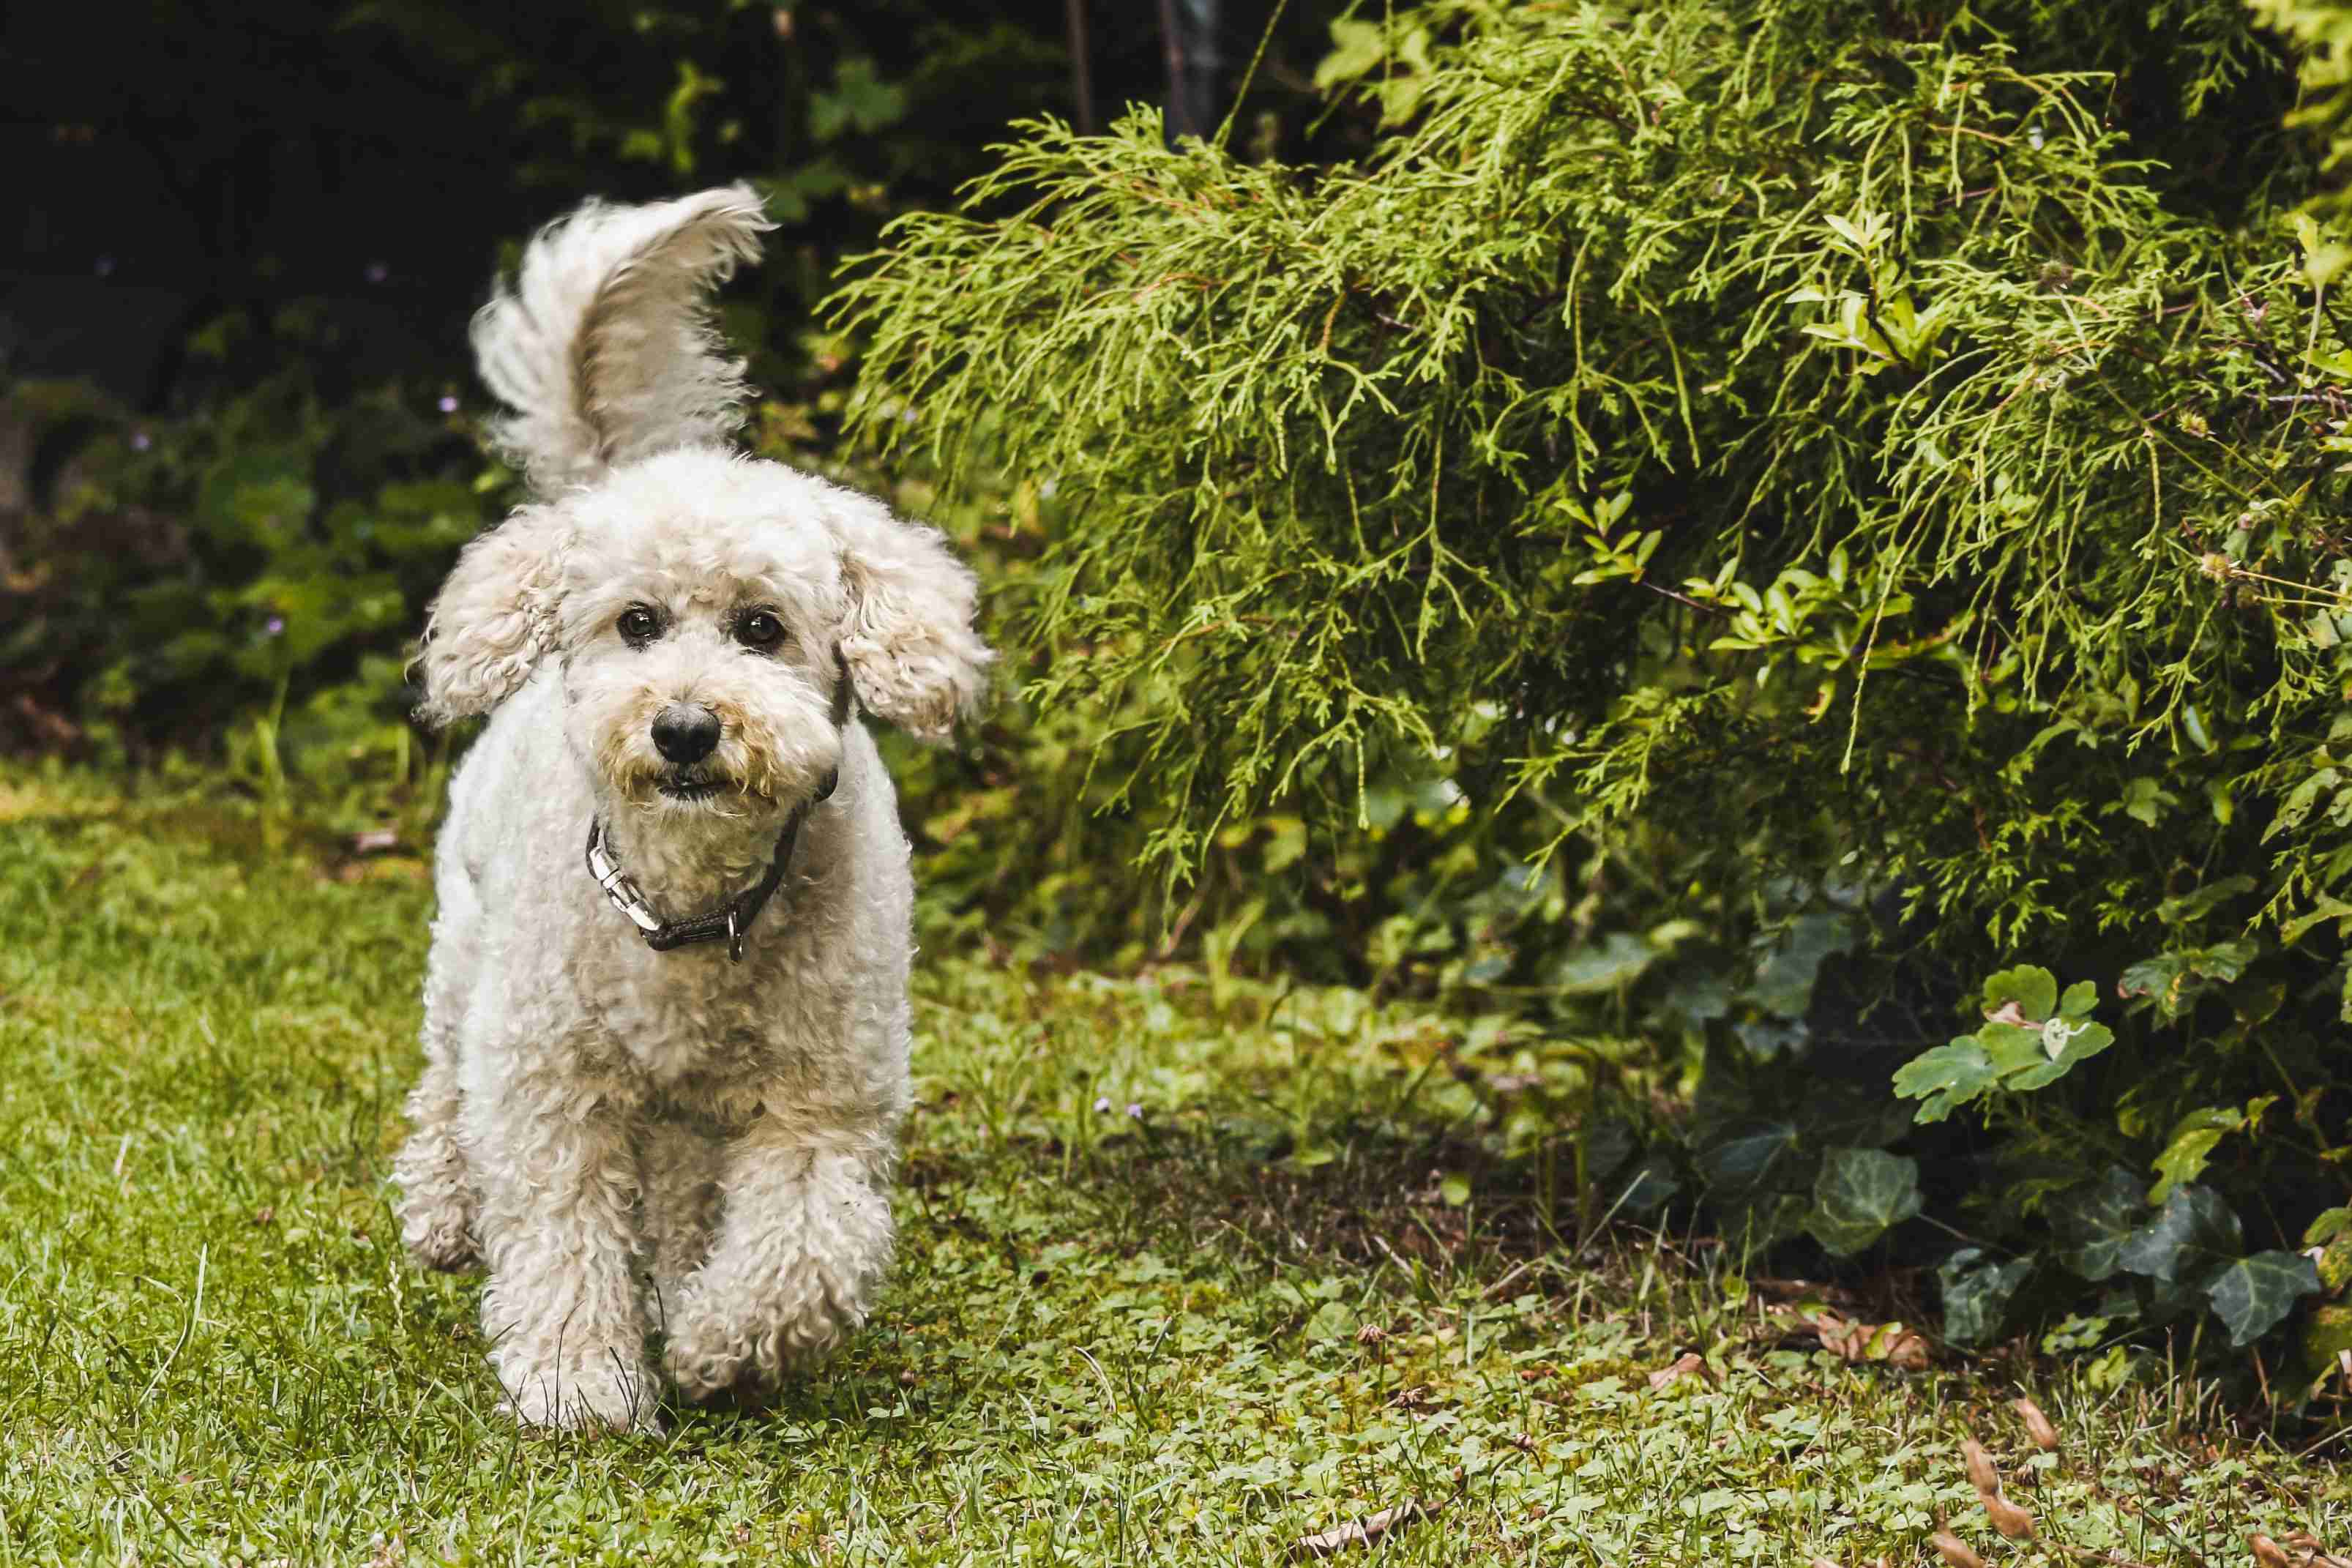 Did you have any concerns about your Poodle puppy's interaction with other dogs at the park?